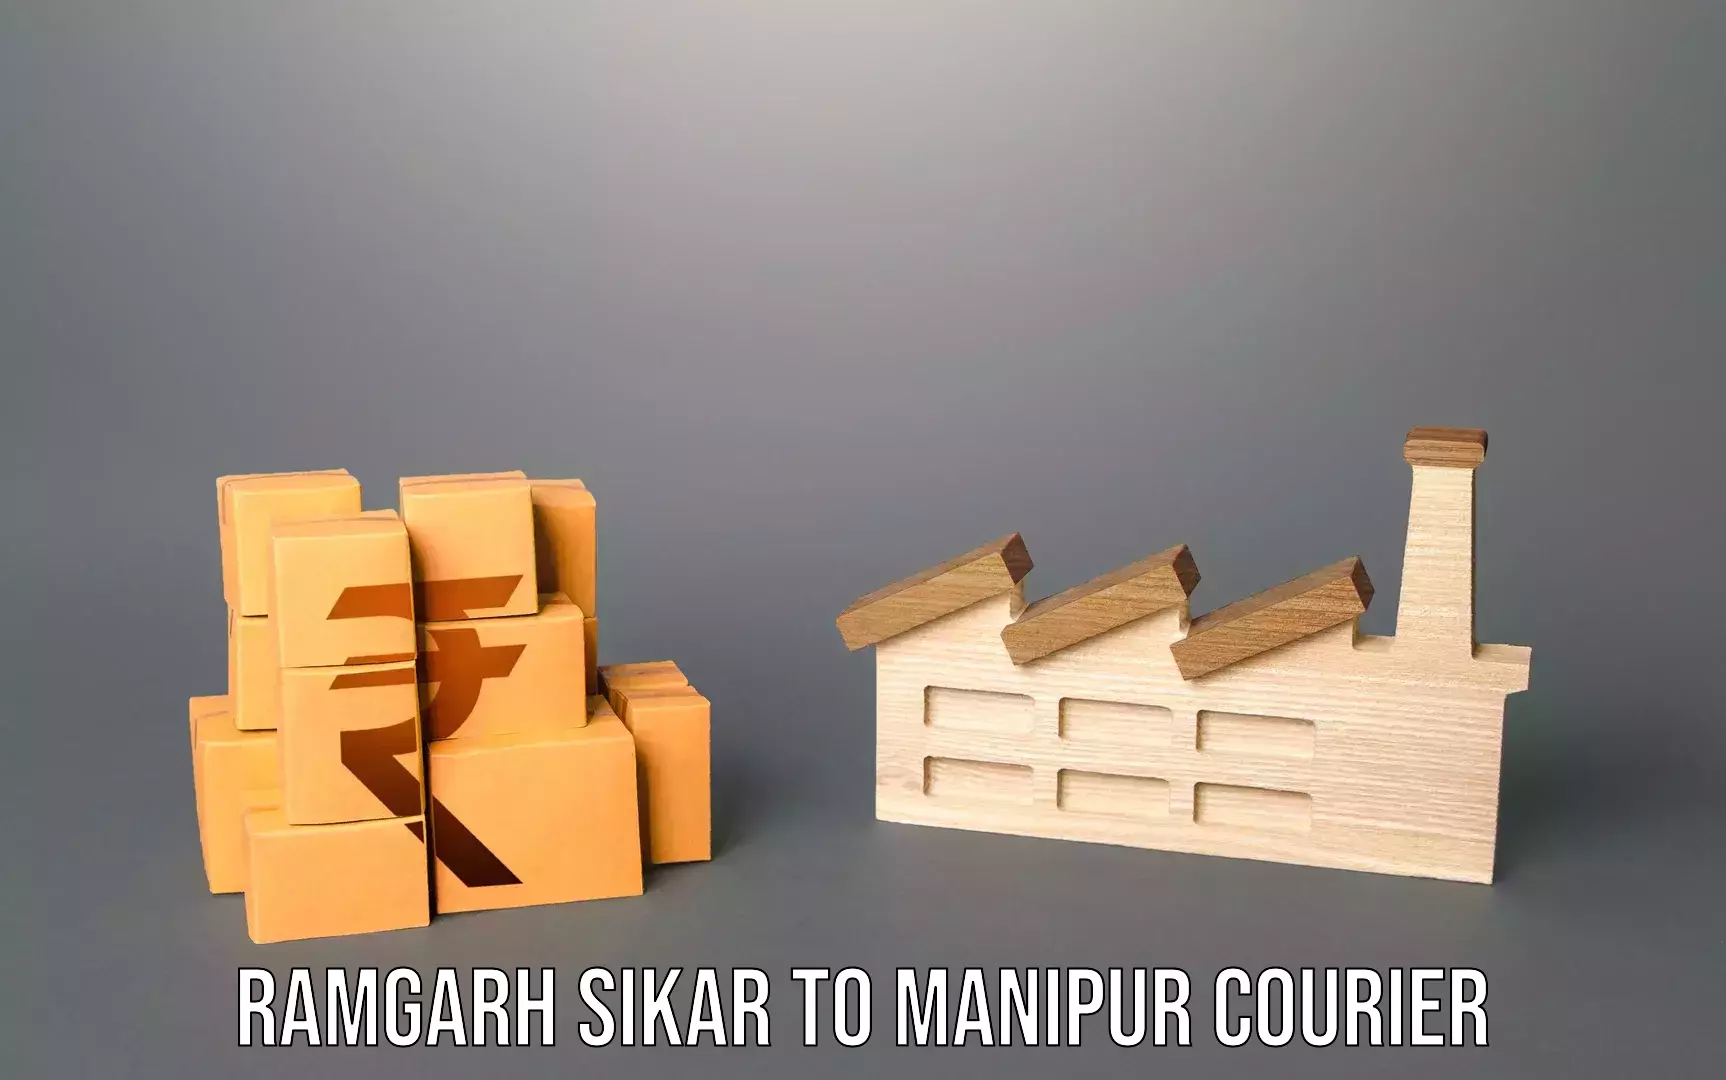 Luggage delivery system Ramgarh Sikar to Manipur